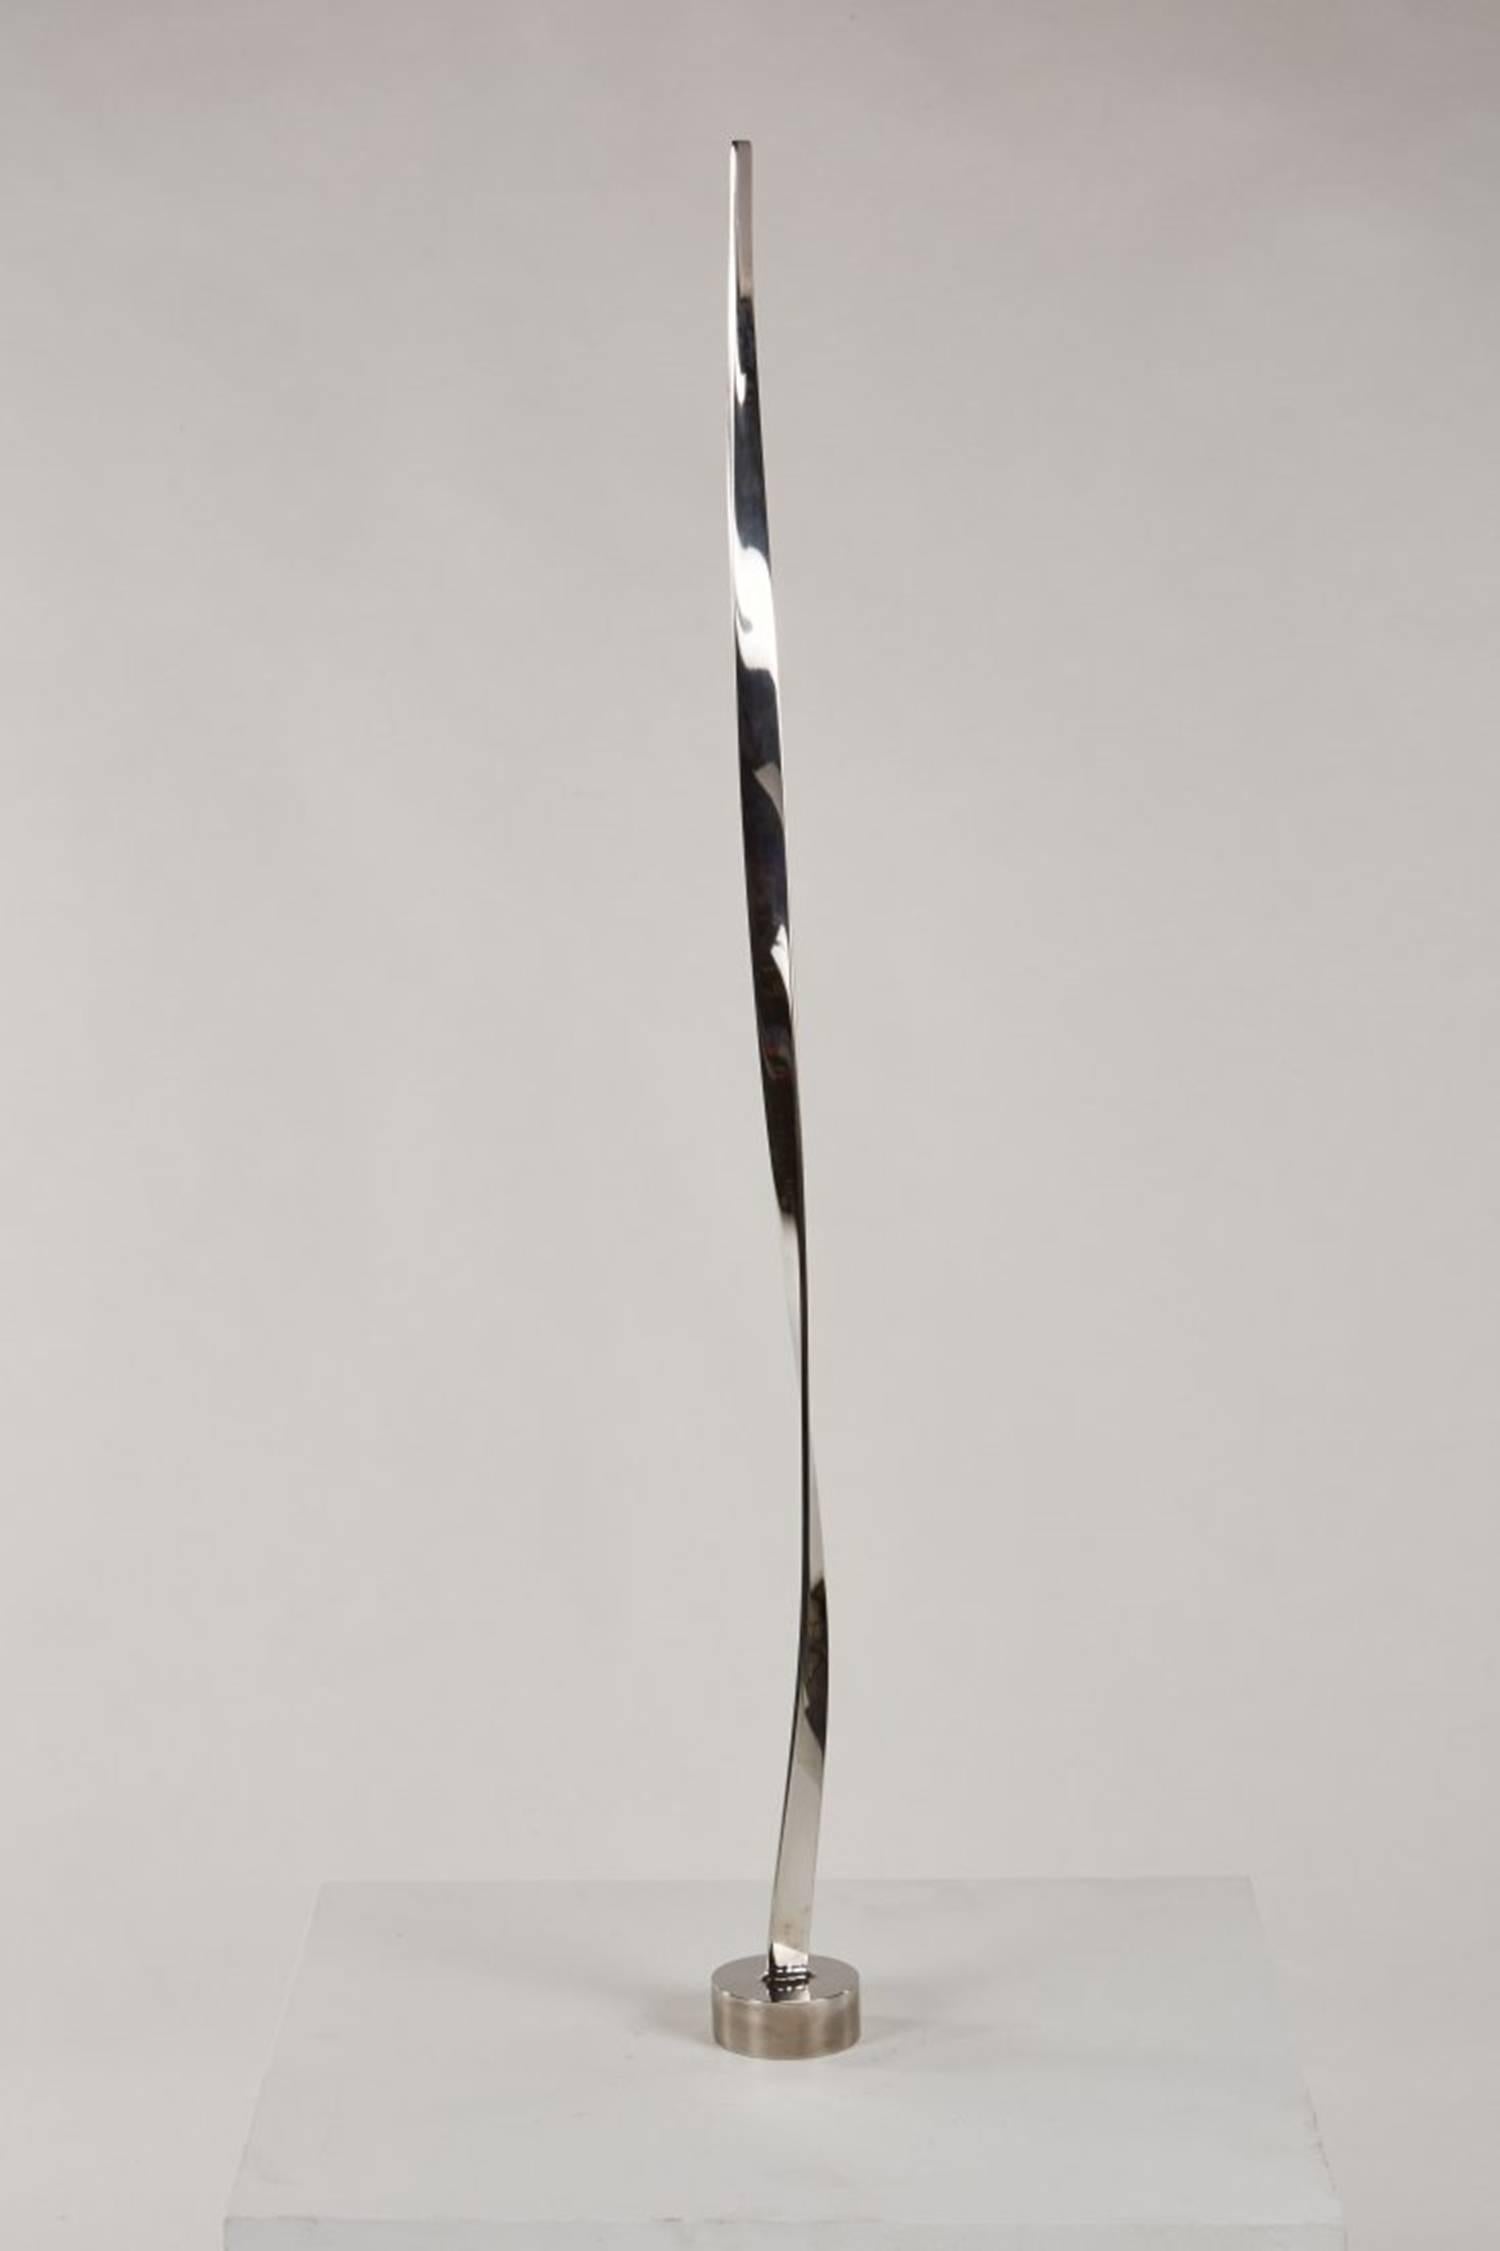 Vintage stainless steel sculpture from the 